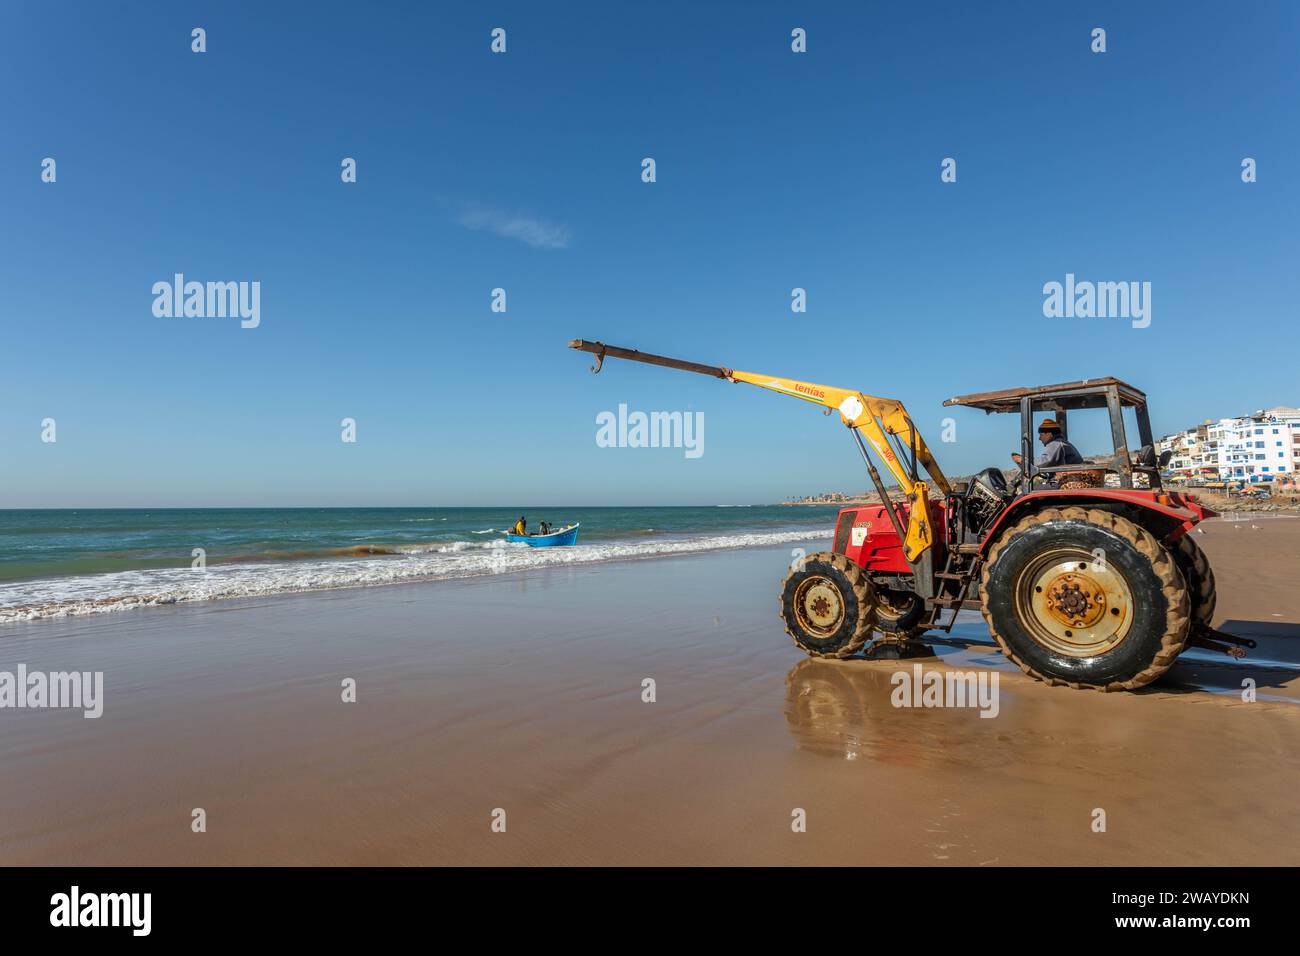 A tractor is on the beach, ready to lift a small, blue, wooden fishing boat from the water after a fishing trip. Taghazout, Morocco, North Africa. Stock Photo